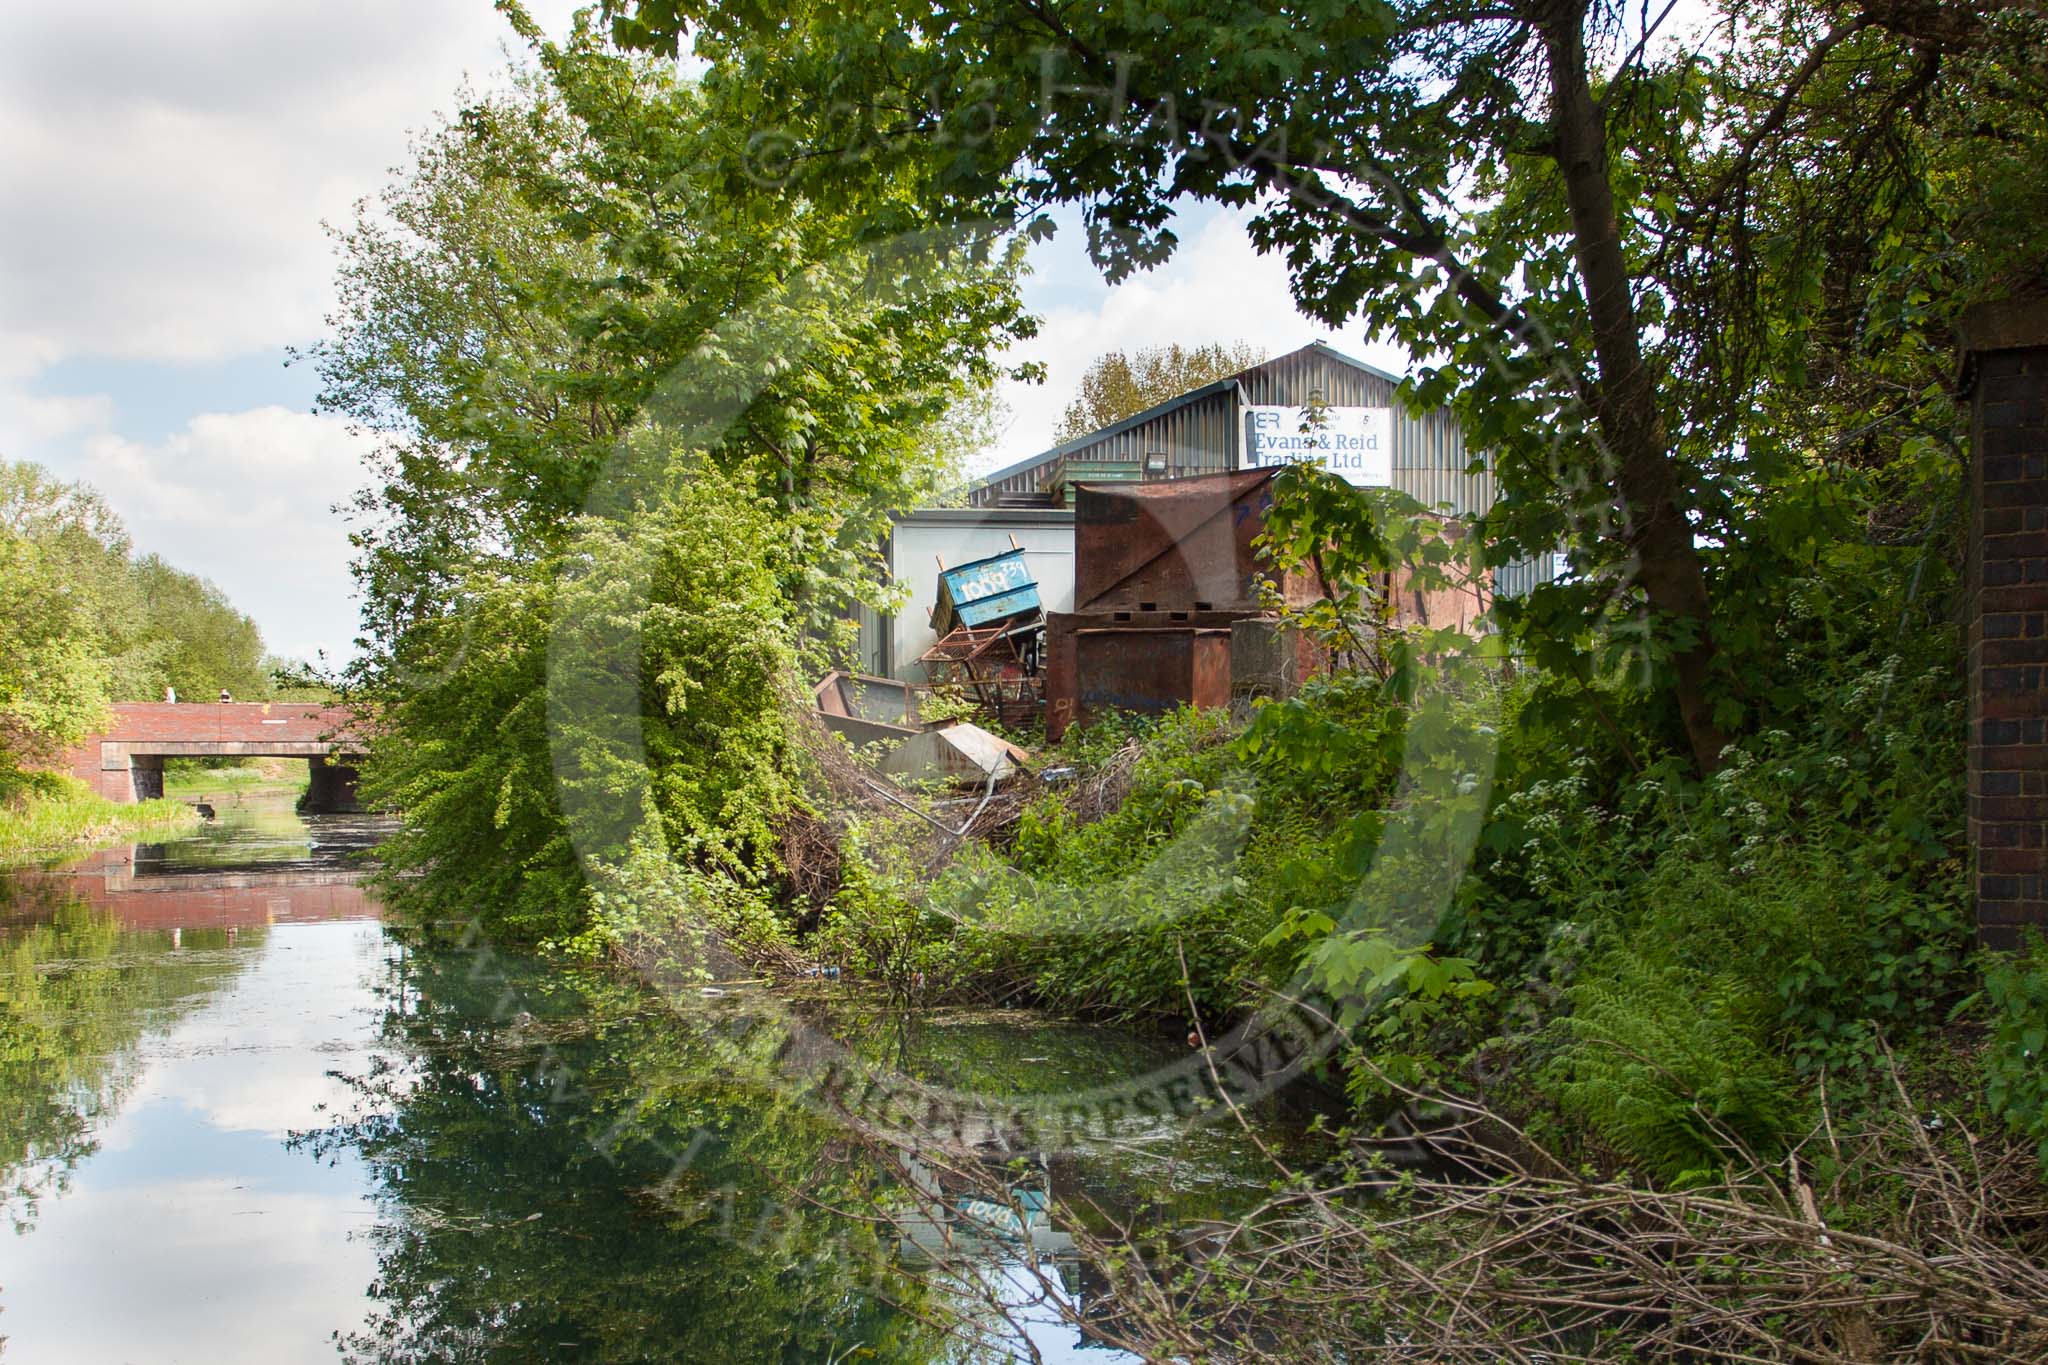 BCN Marathon Challenge 2013: Evans & Reid Trading Ltd seem to be using the side of the canal as a dump on the Bradley Arm, close to Deepfields Junction with the BCN Main Line..
Birmingham Canal Navigation,


United Kingdom,
on 25 May 2013 at 15:22, image #212